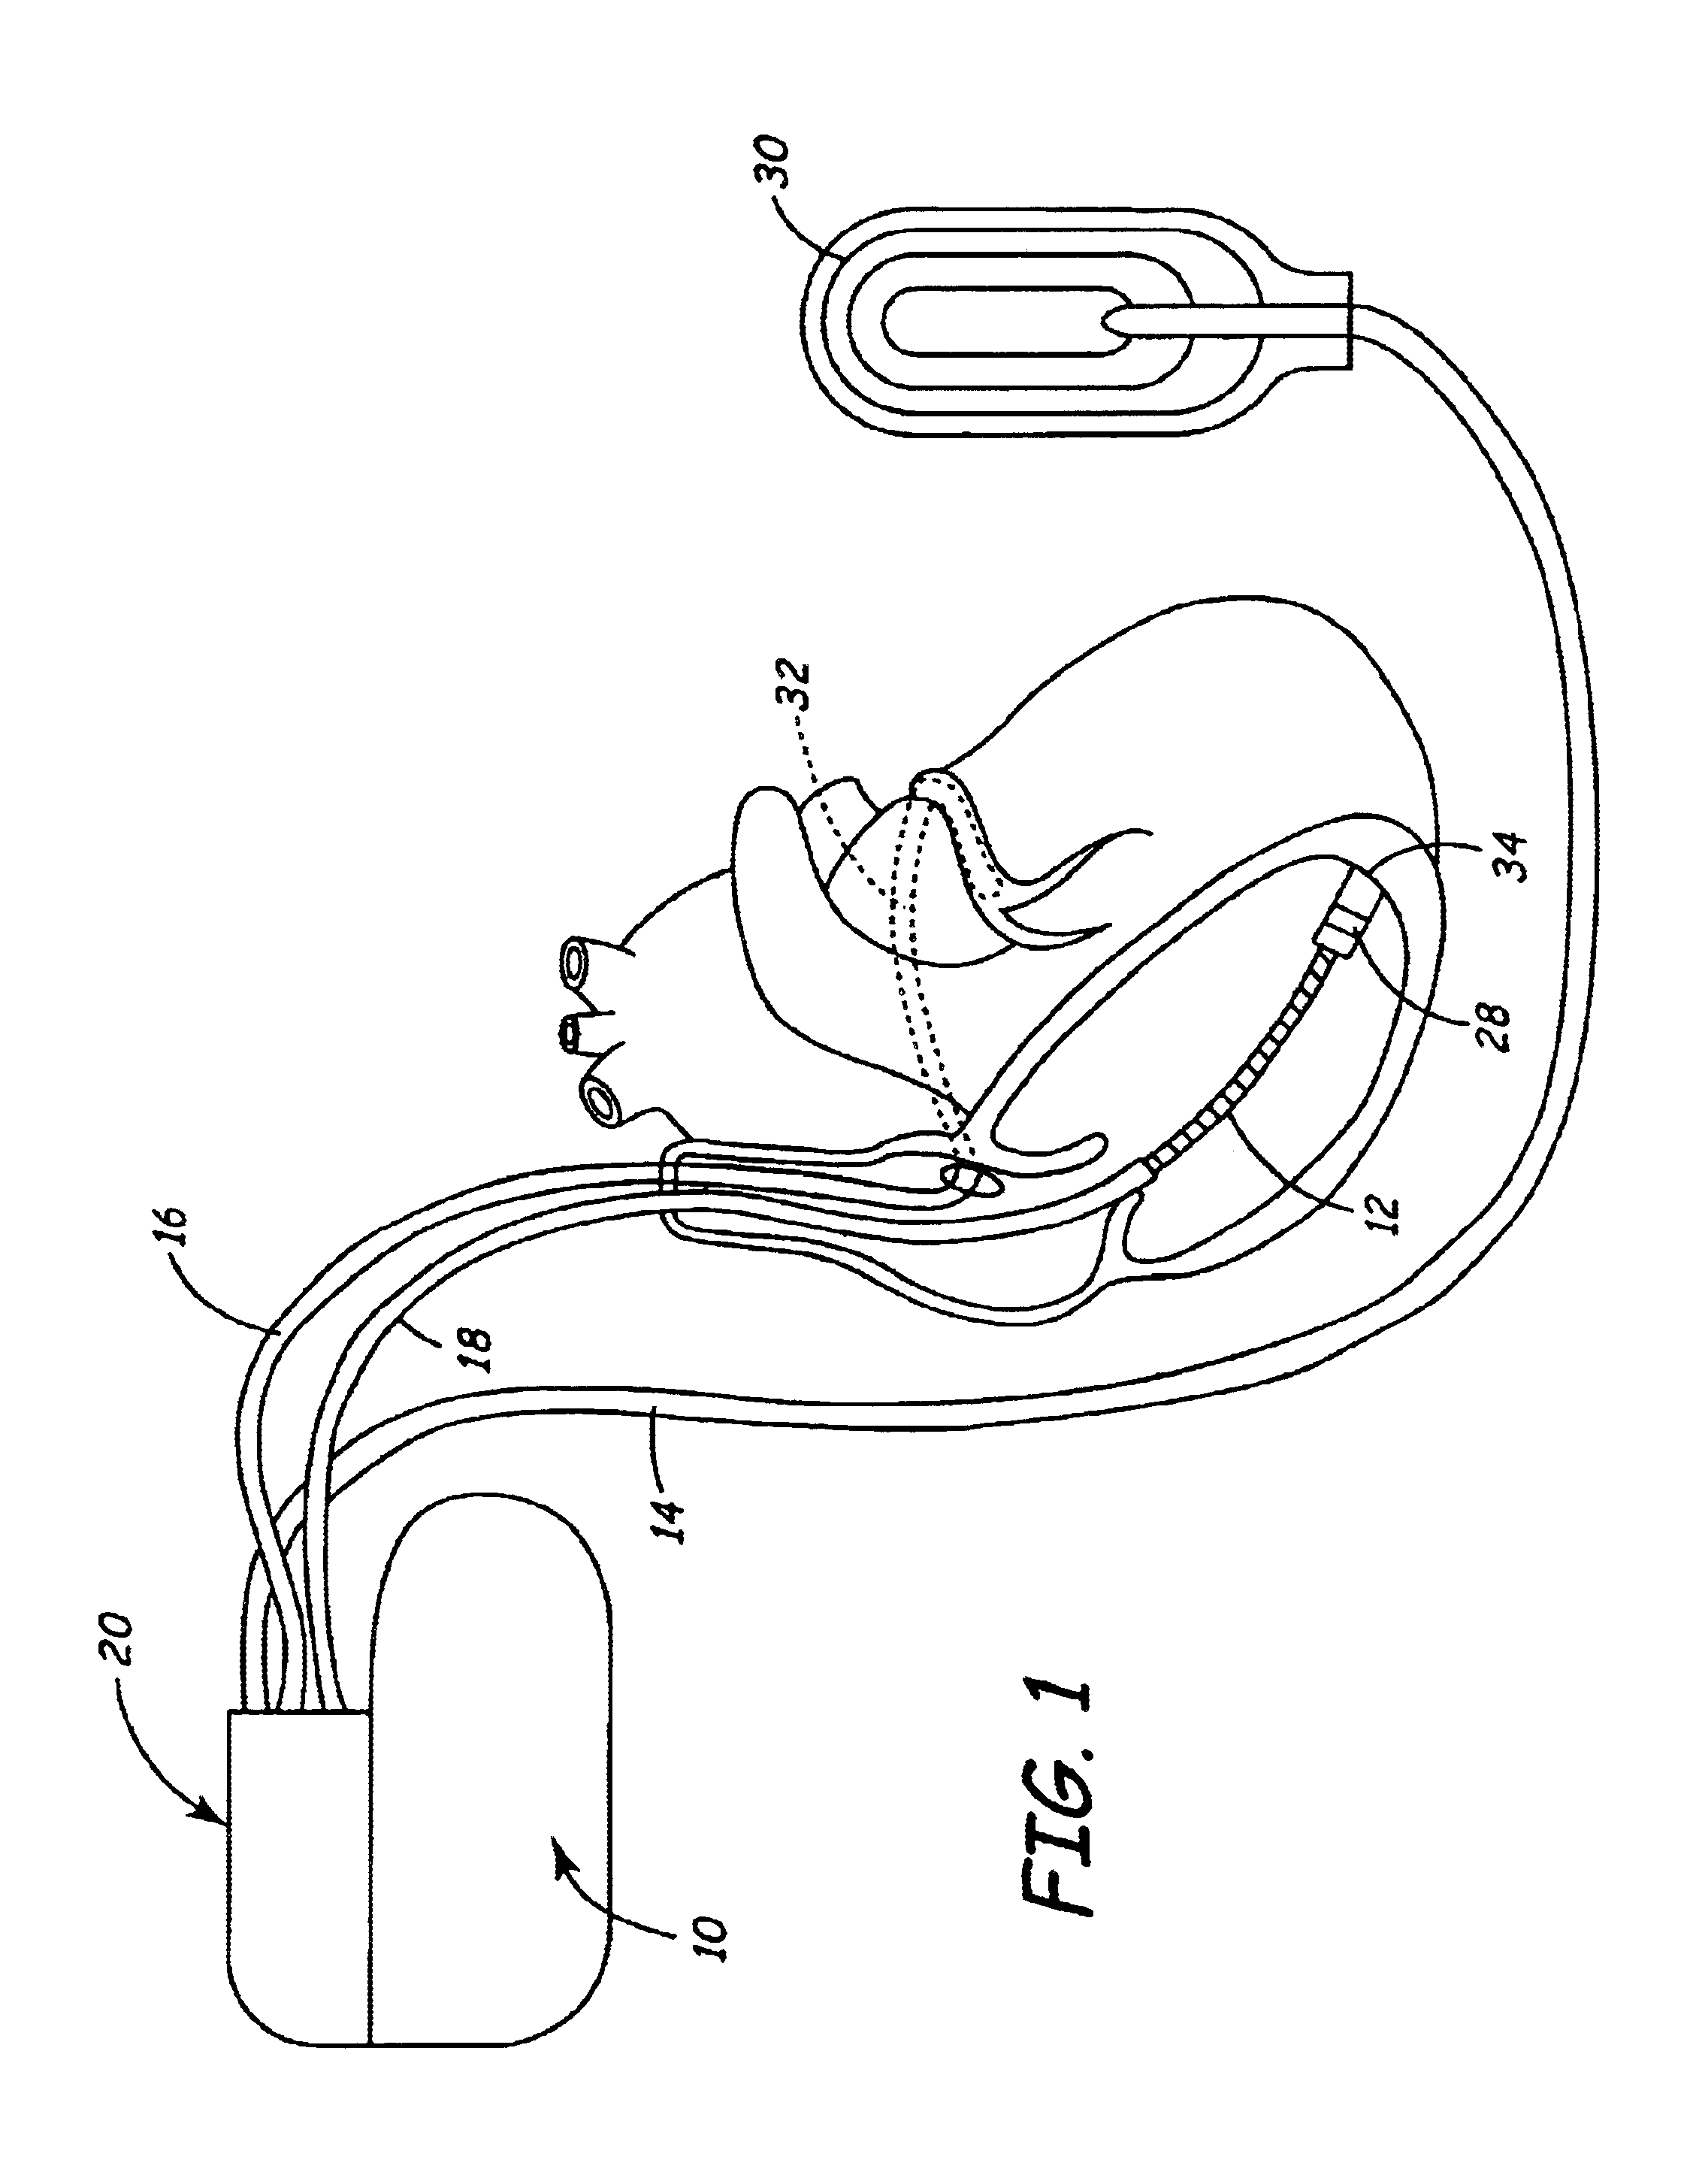 Implantable medical device having flat electrolytic capacitor fabricated with laser welded anode sheets